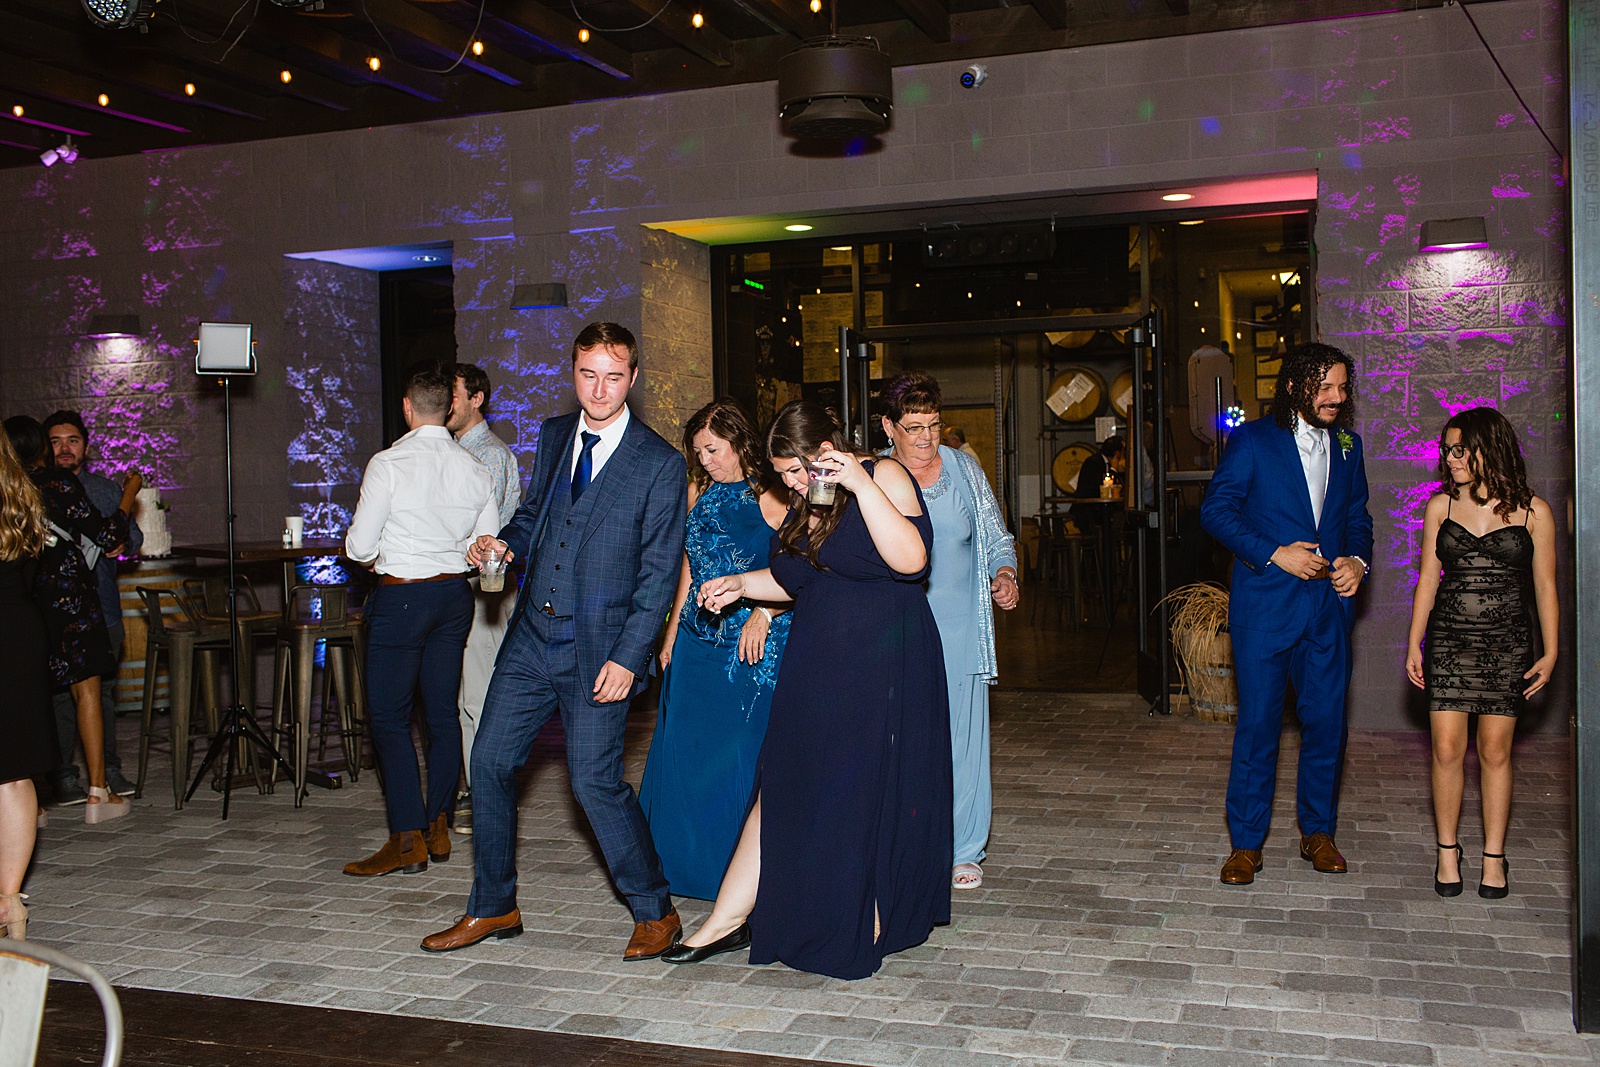 Guests dancing together at San Tan Gardens wedding reception by Arizona wedding photographer Juniper and Co Photography